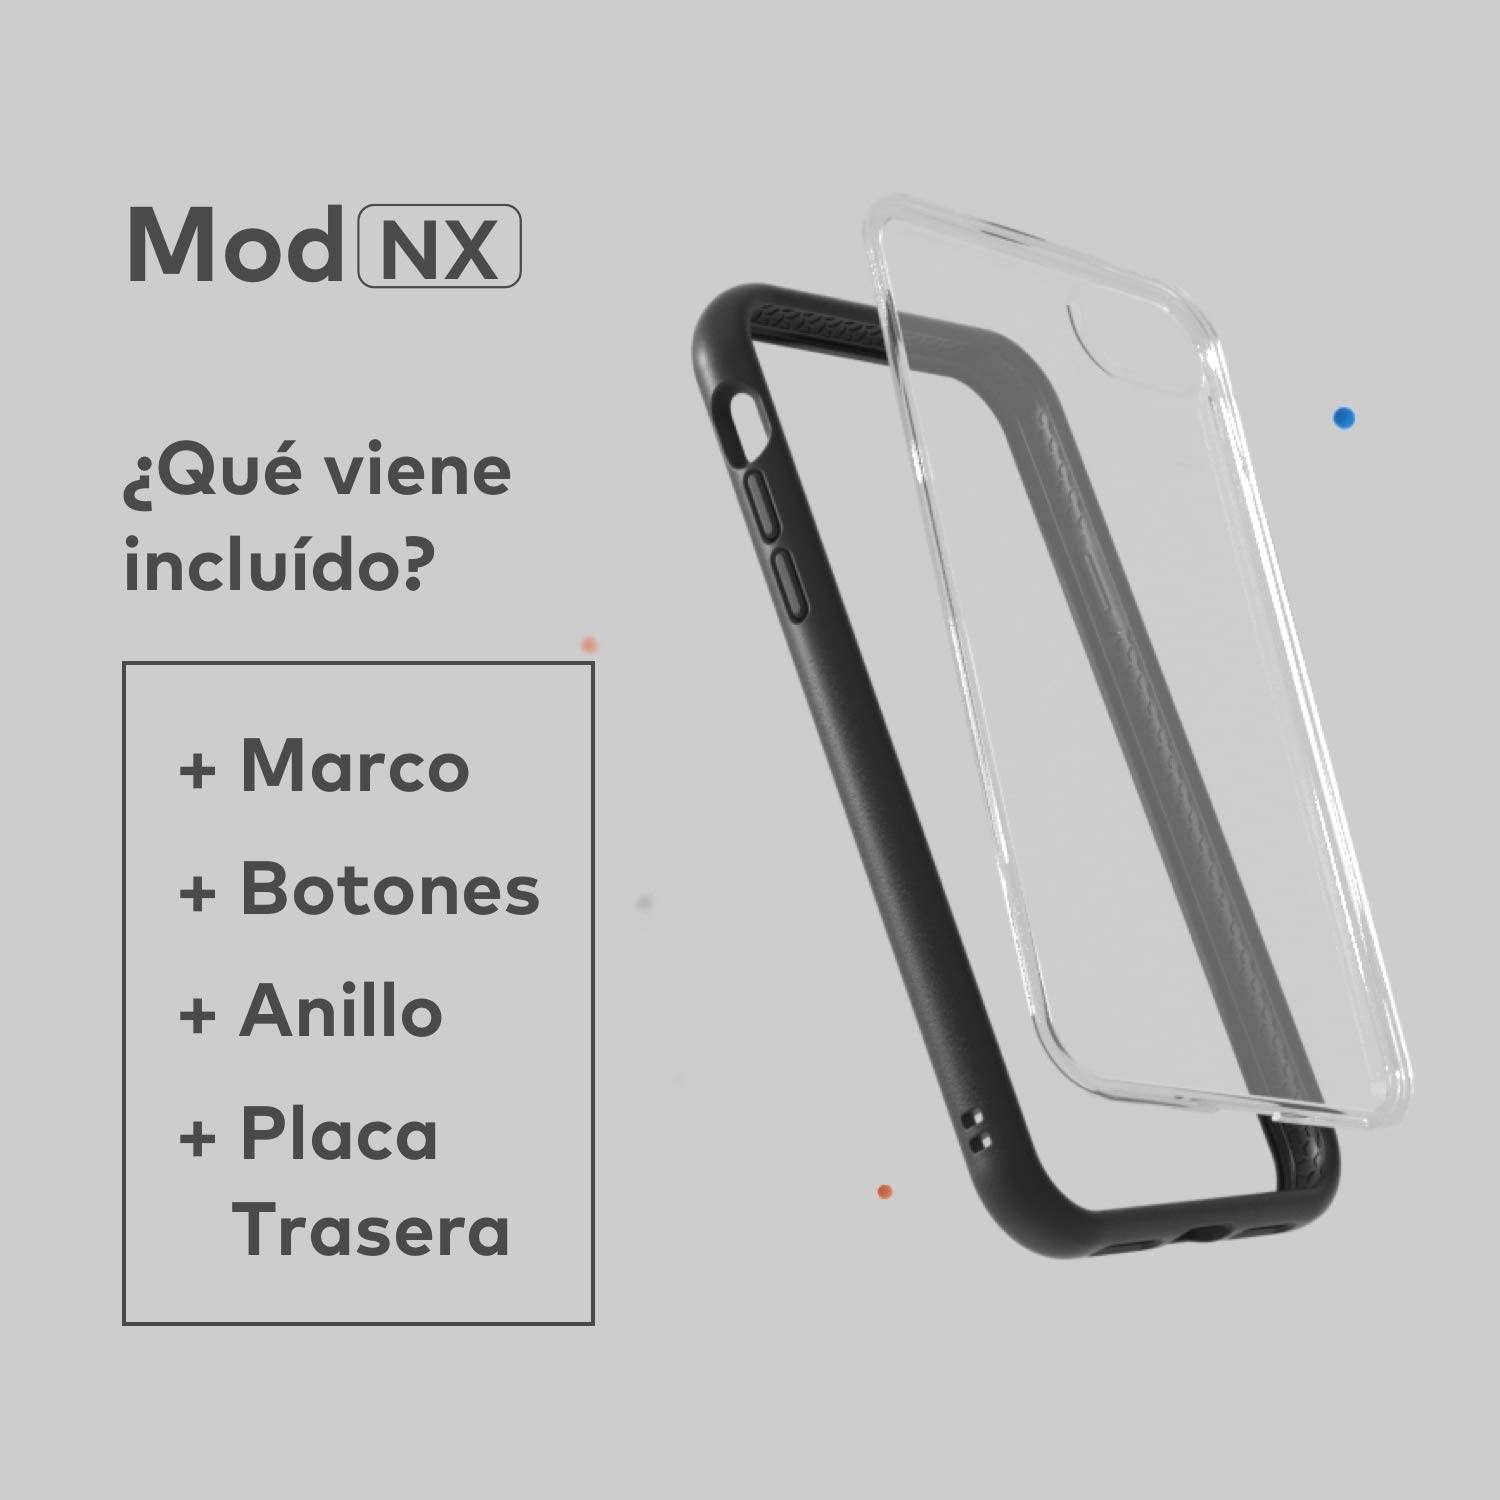 RhinoShield Mod NX iPhone SE / 8 / 7 / Plus Customizable Shock Absorbent Heavy Duty Protective Cover - Shockproof Bumper with Clear Back